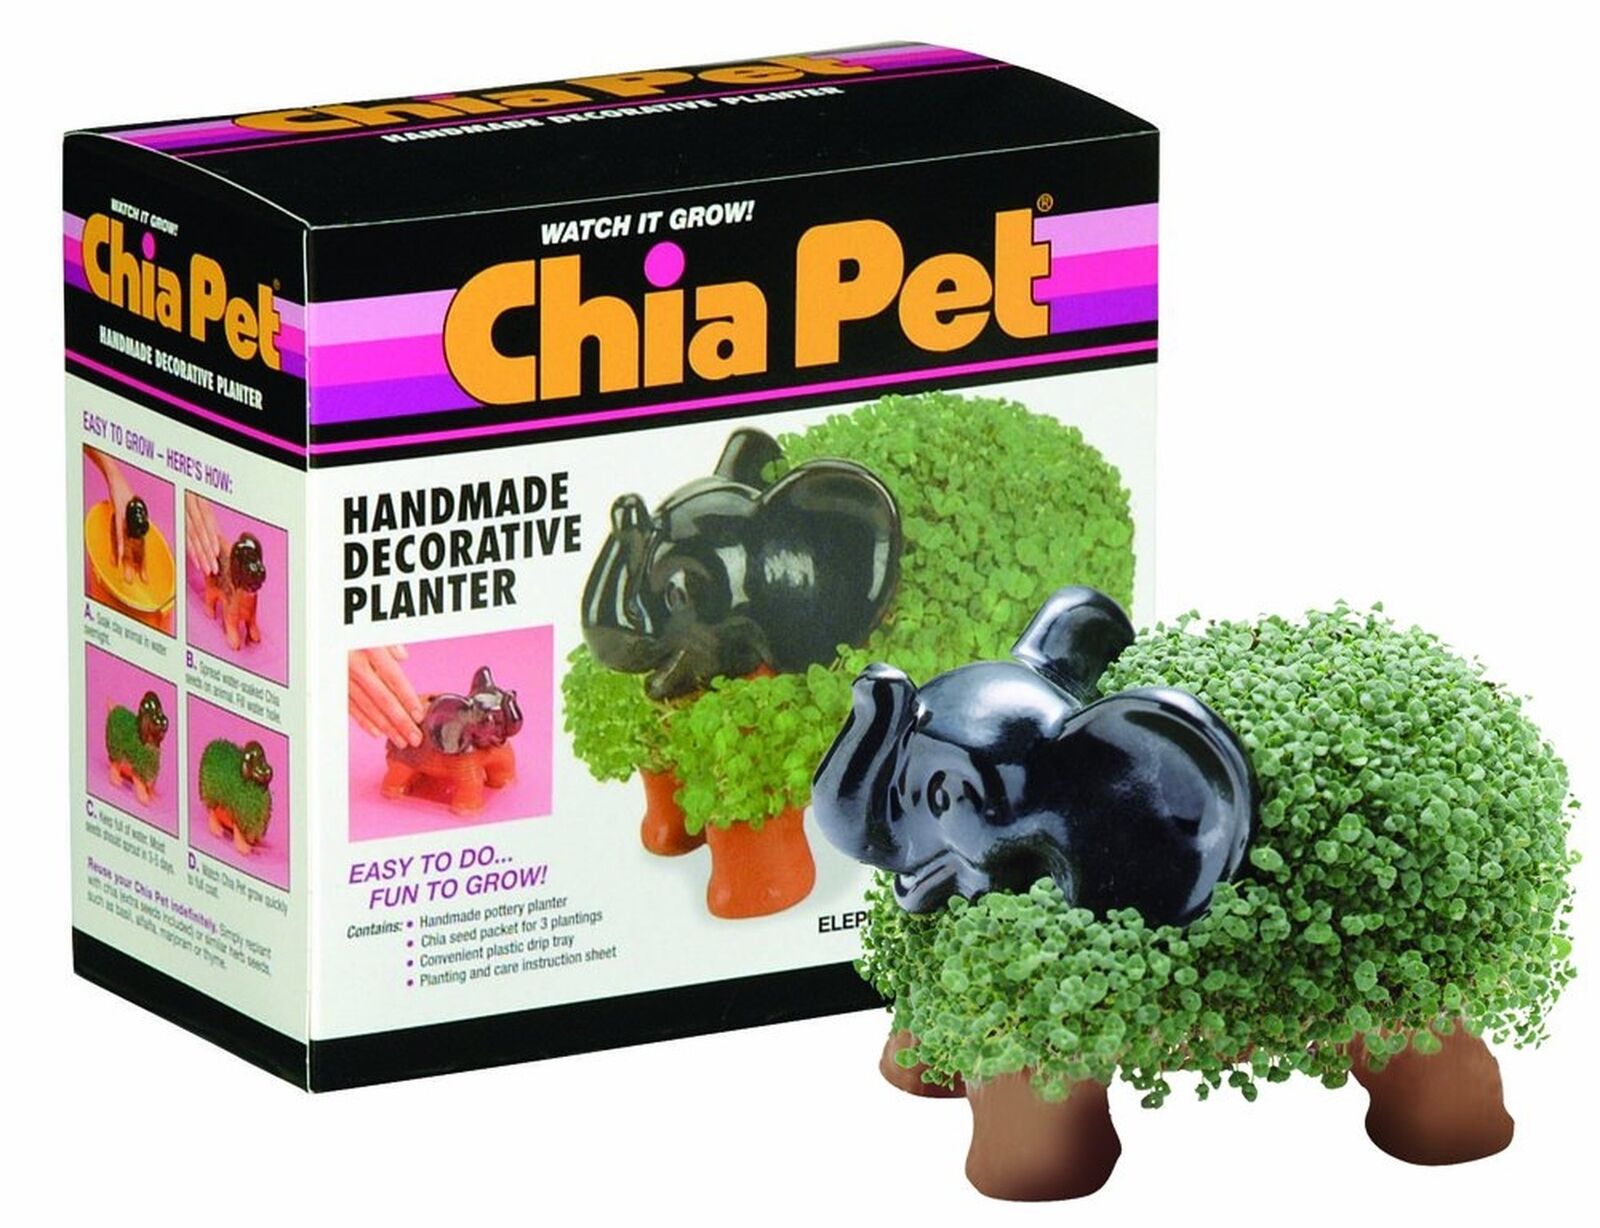 Chia Pet Elephant with Seed Pack, Decorative Pottery Planter, Easy to Do and ...